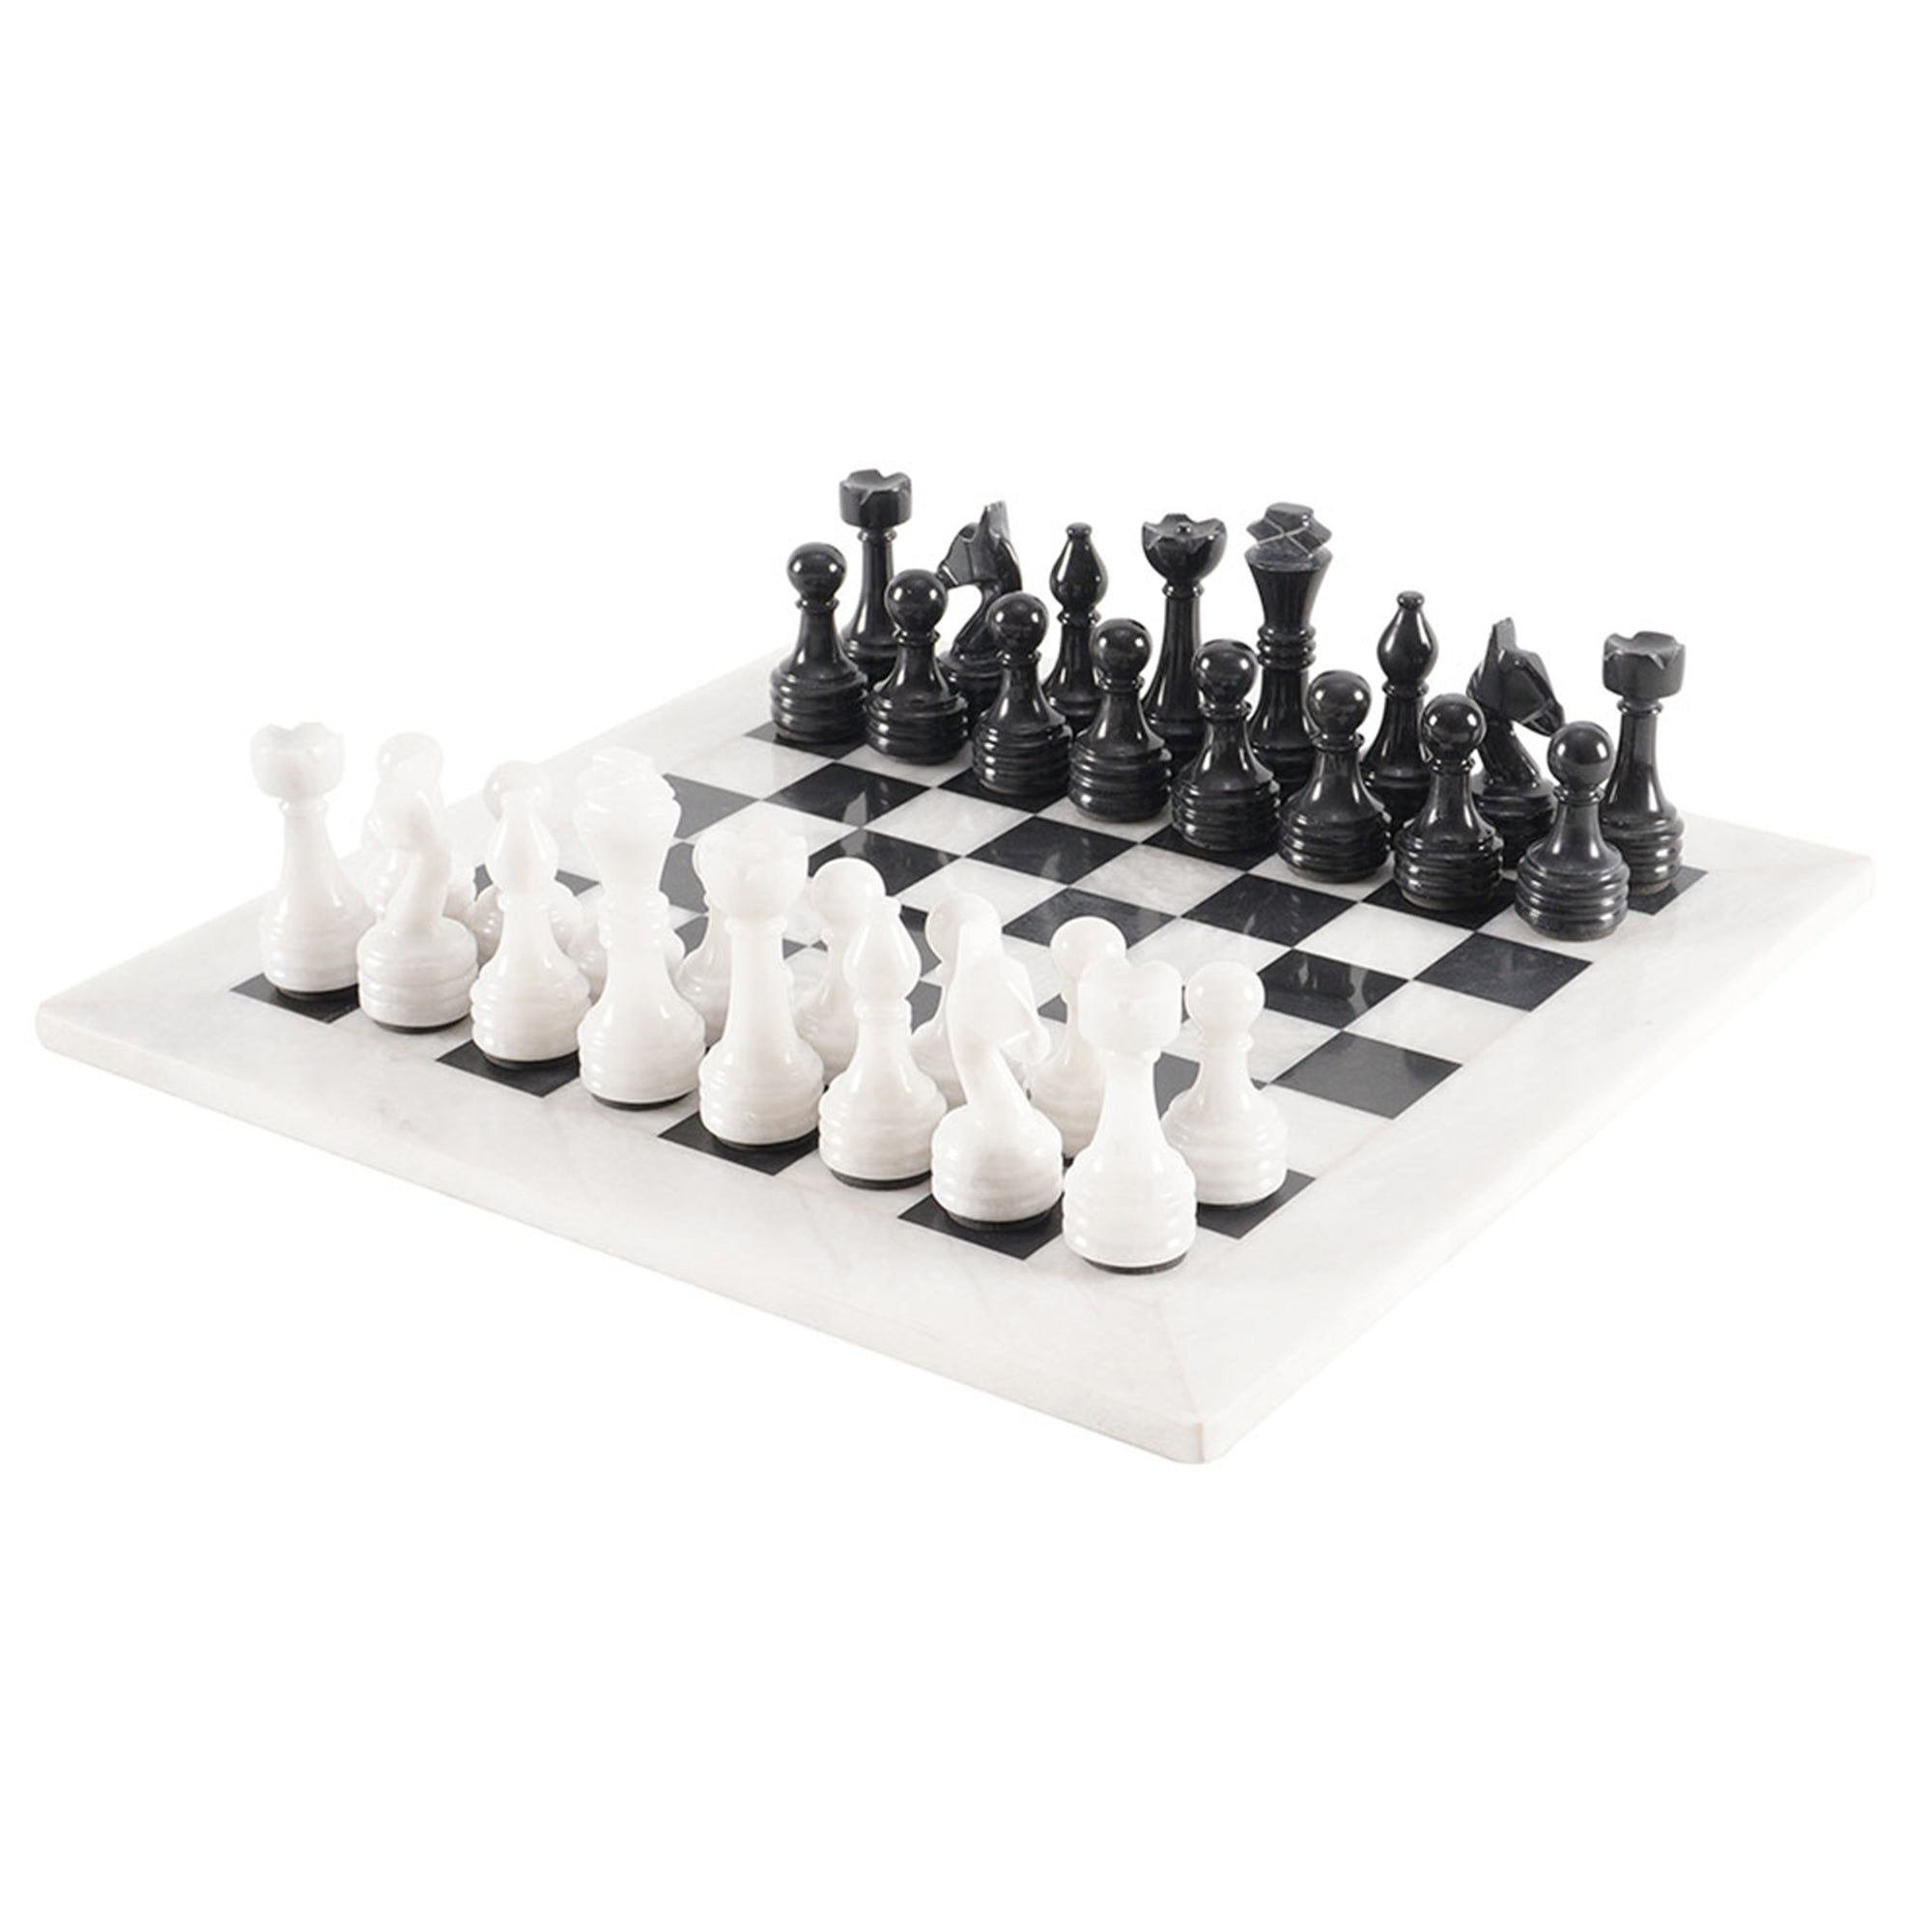  White Marble Chess Board 15 x 15 Inch, Chess Players Shout  Crossword Clue, Chess Unblocked, Handmade Chess Board, The Queen's Gambit,  Piece Of Conversation : Handmade Products